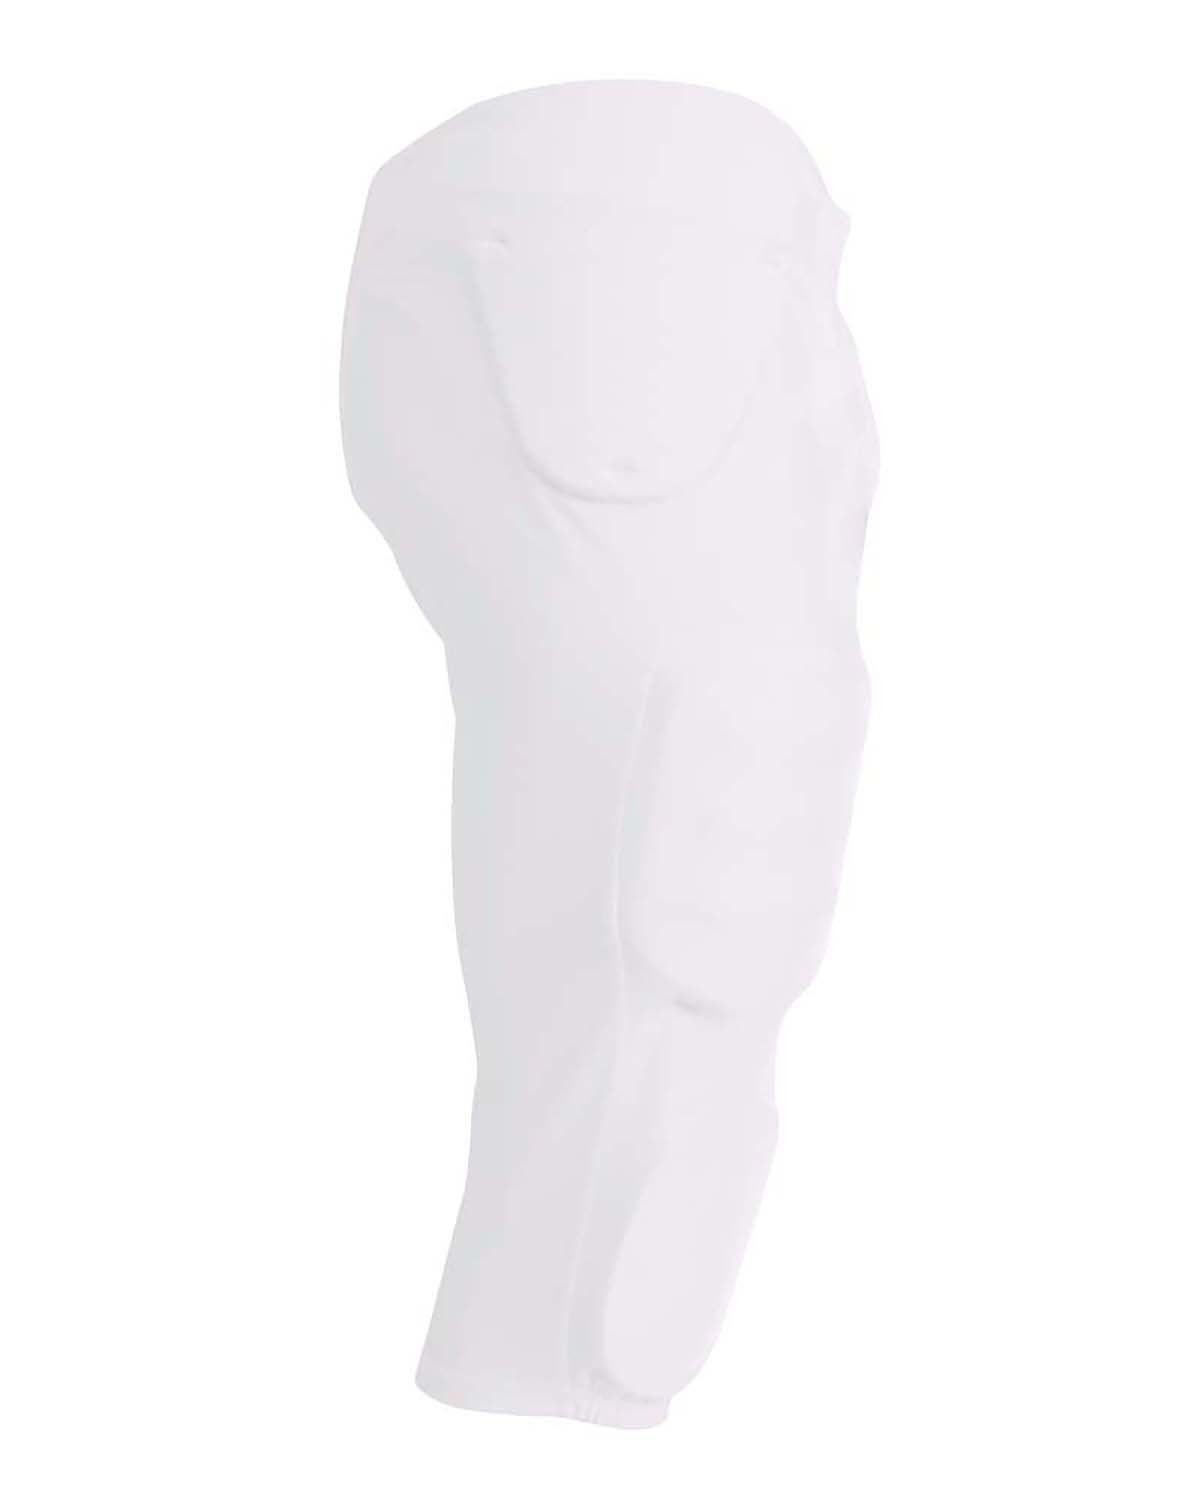 'A4 NB6198 Boy's Integrated Zone Football Pant'